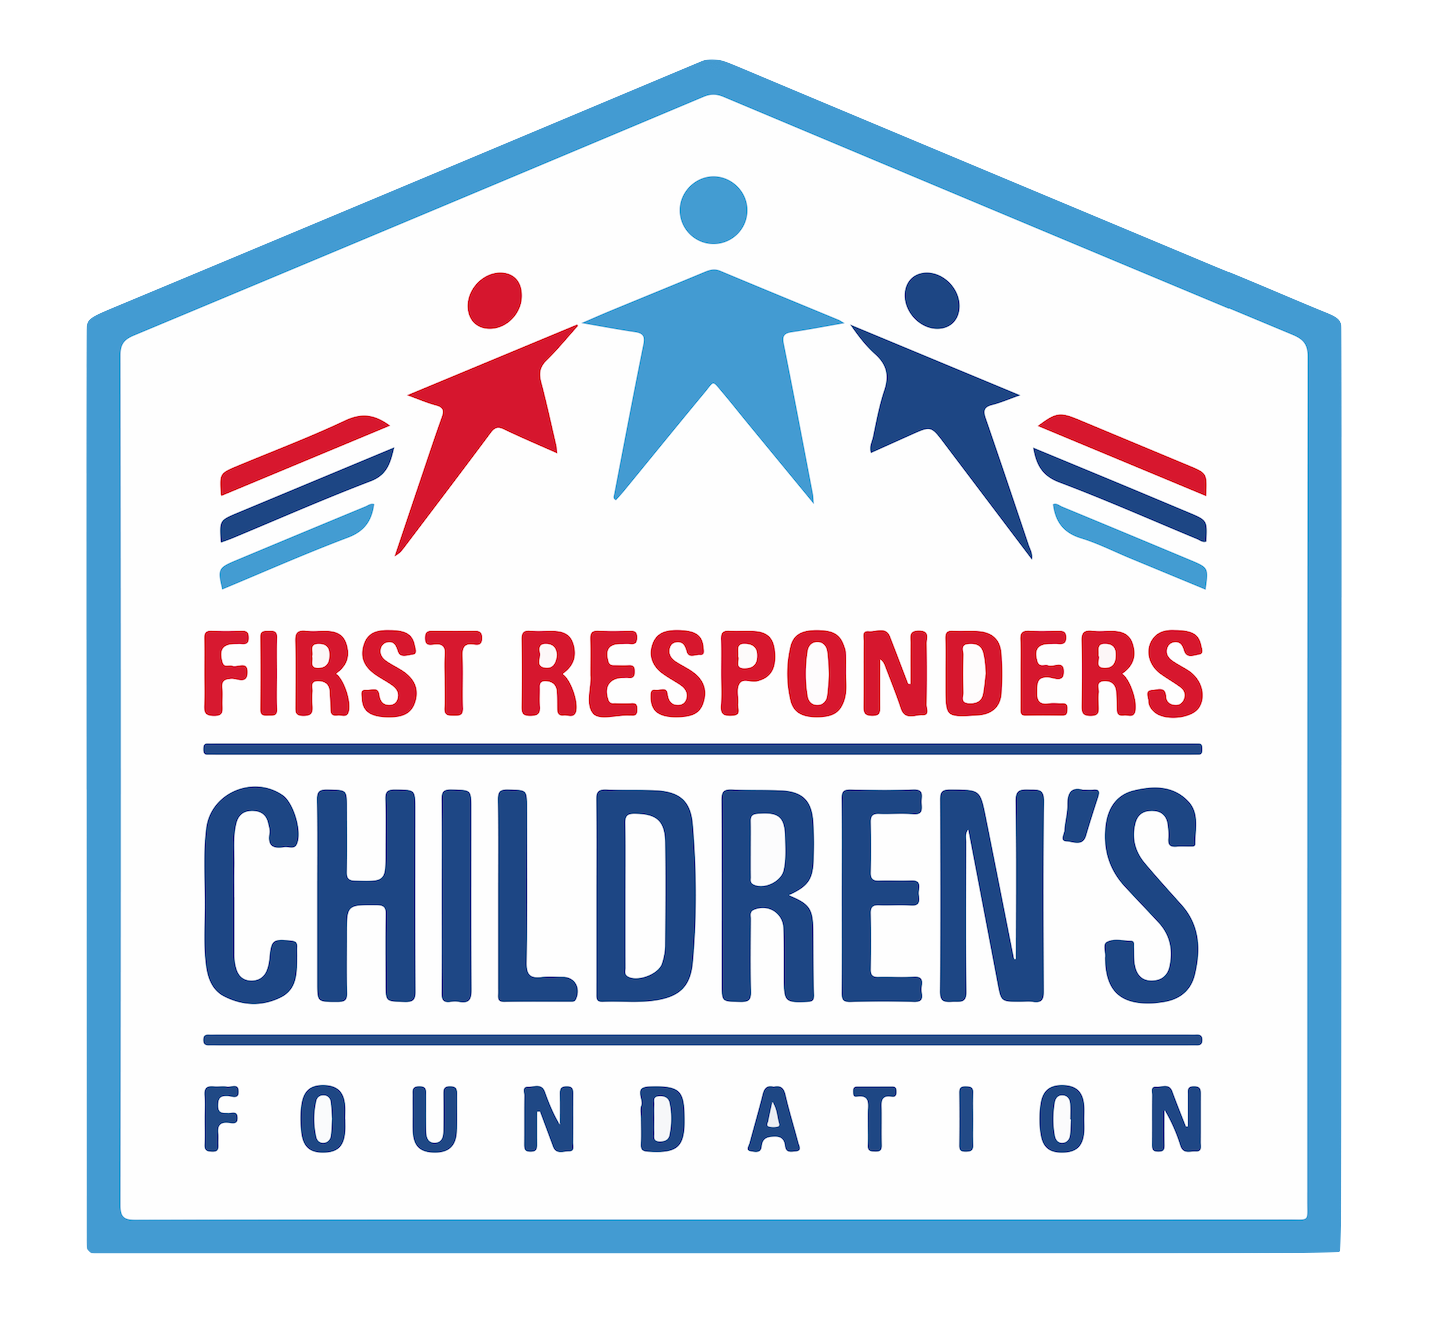 First responders children’s foundation pays tribute to first responders on national first responders day